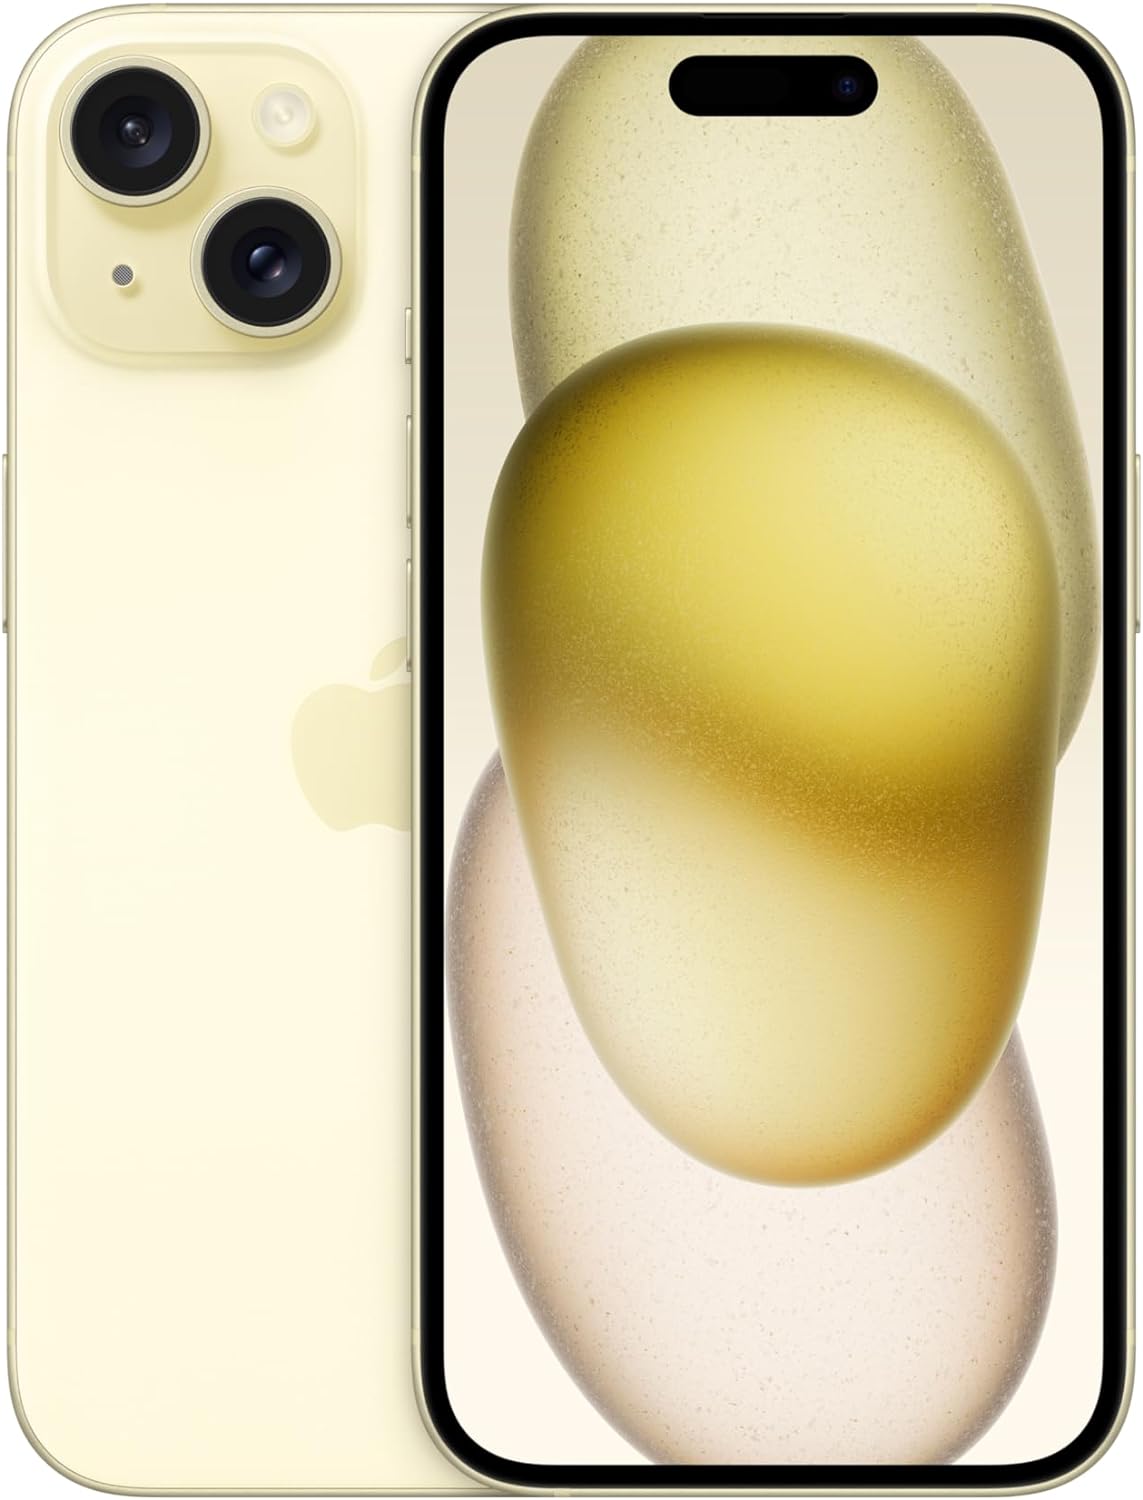 Apple iPhone 15 (128 GB) - Yellow: Dynamic Island alerts and Live Activities for seamless multitasking. 0195949036262